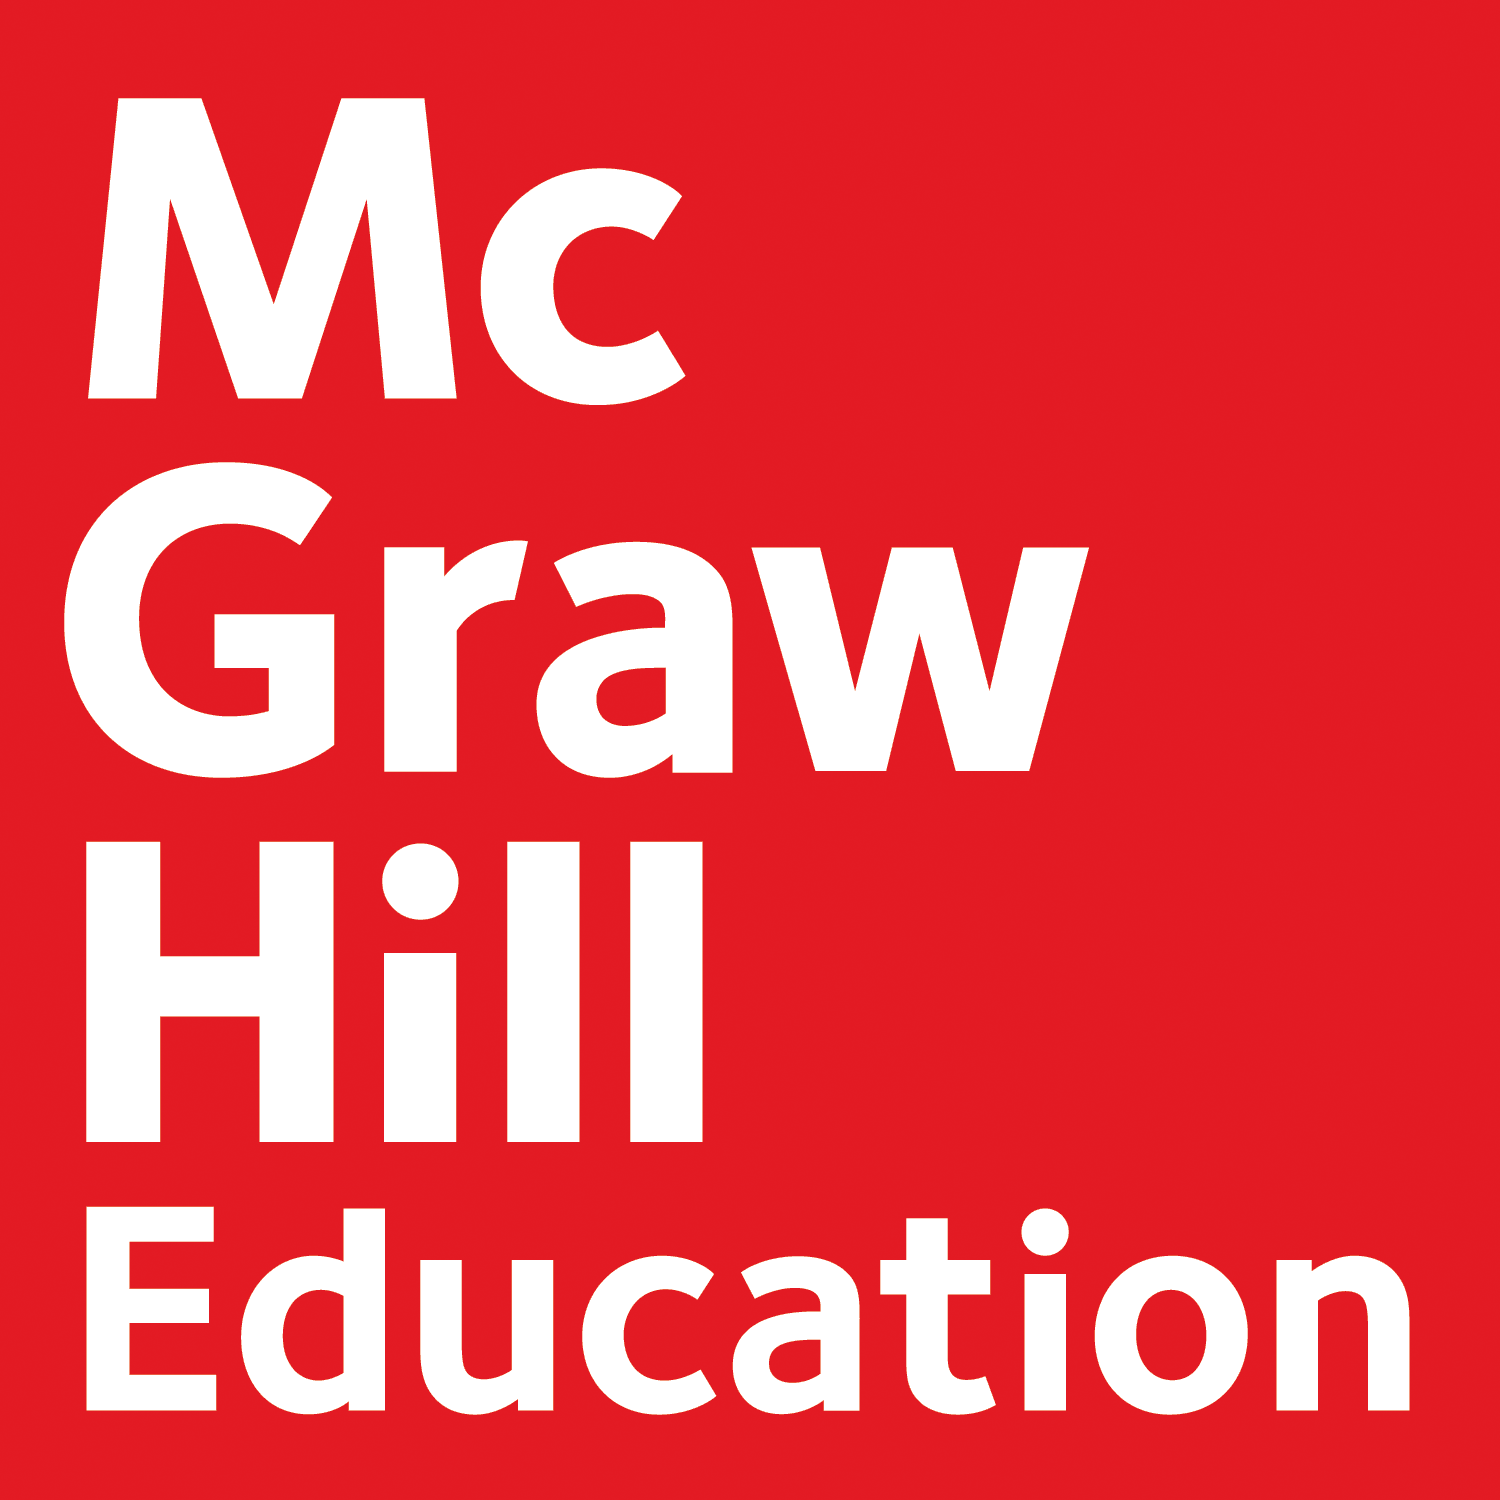 http://www.mheducation.com/